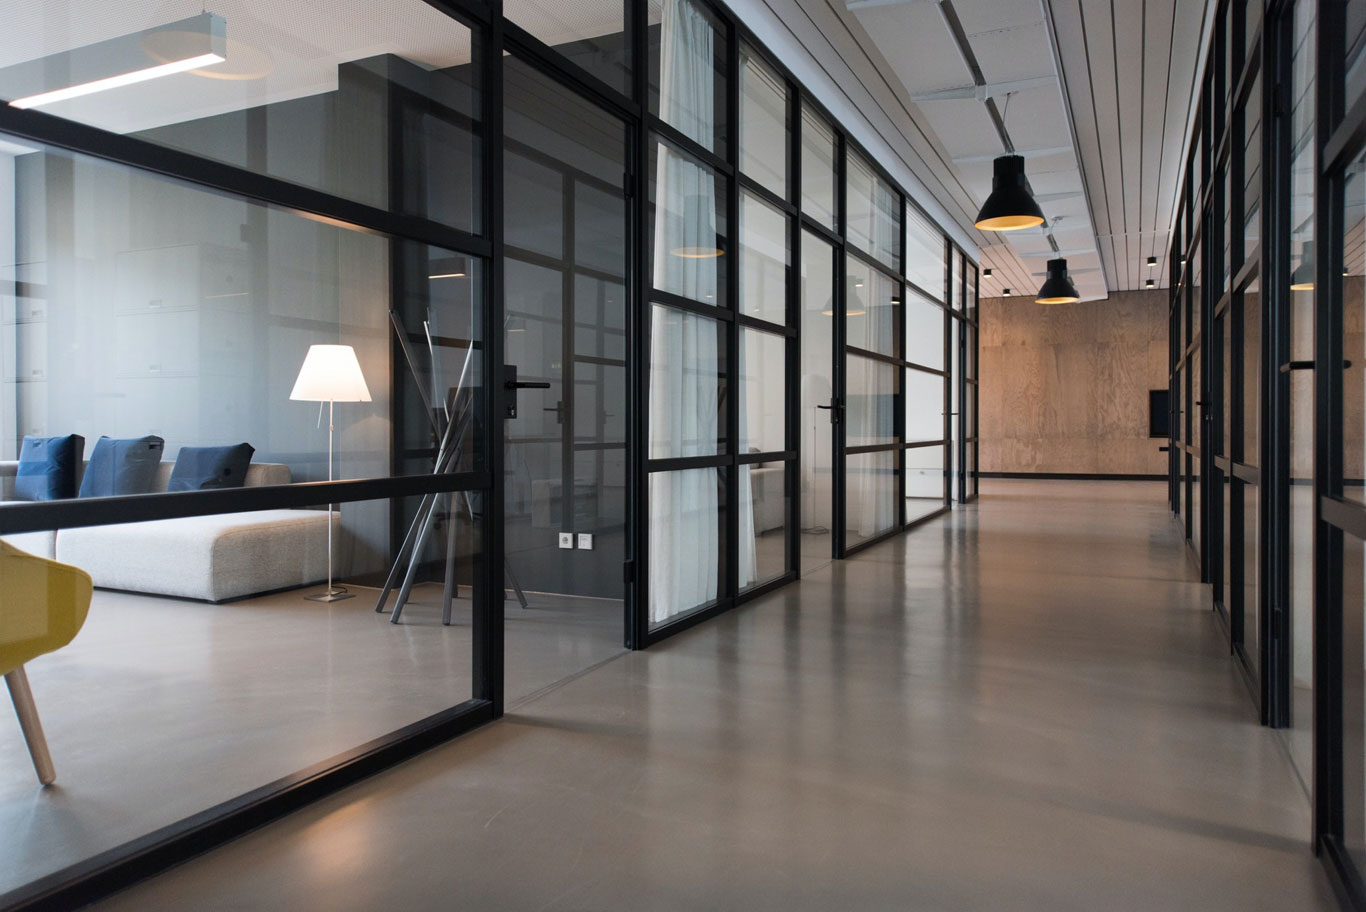 How to Find Affordable Office Spaces for Rent